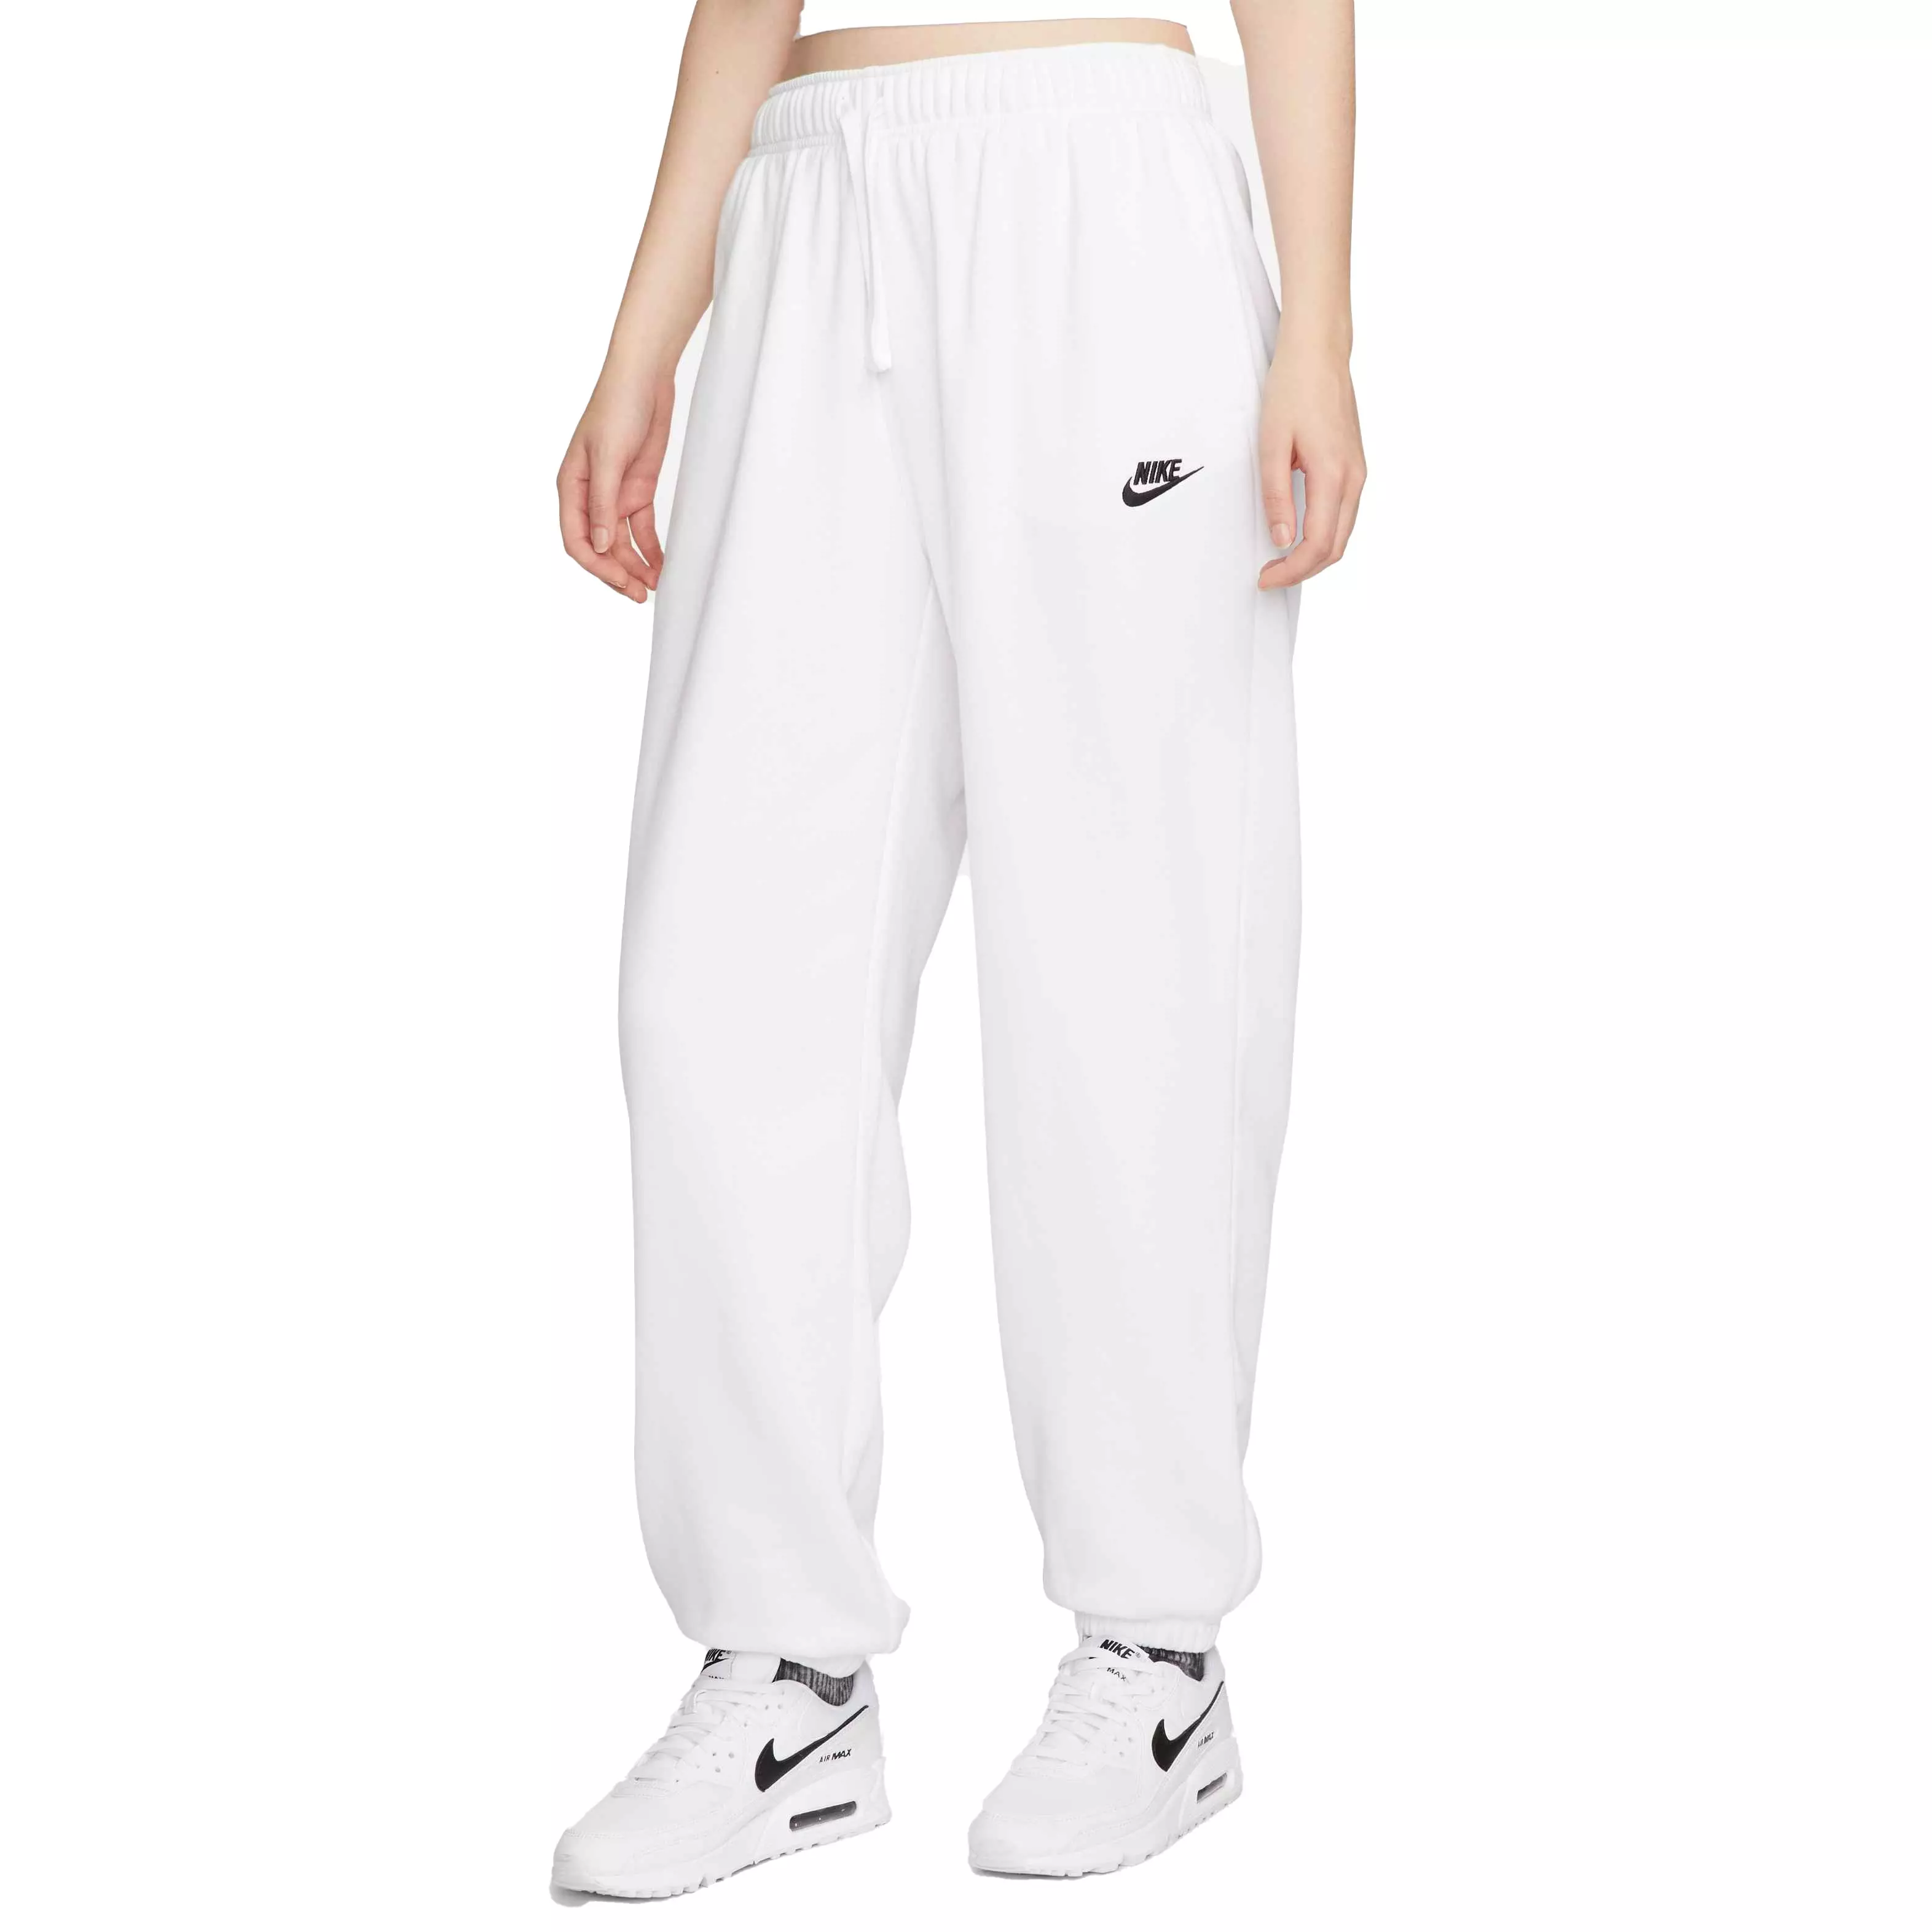 Nike fleece sweats are perfect to dress up or down, they can